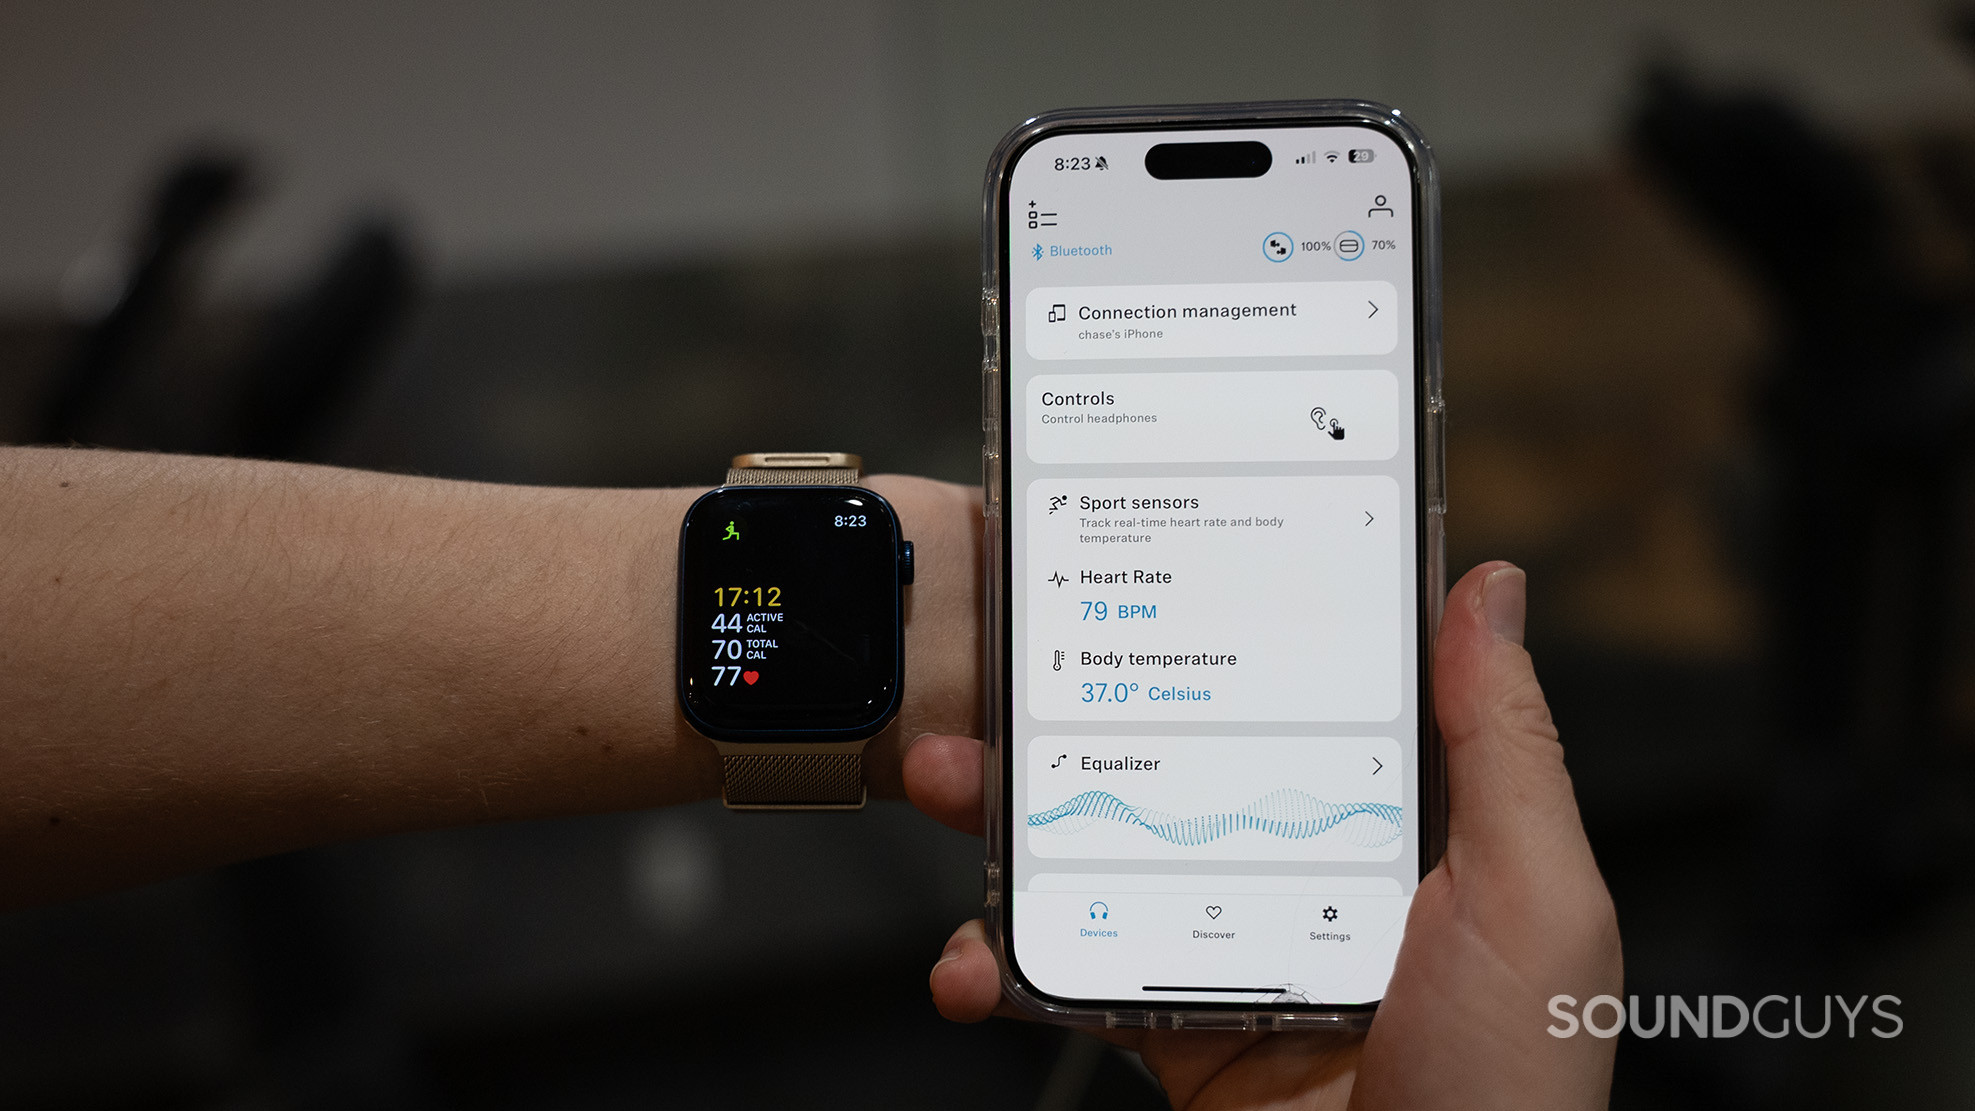 The Sennheiser Smart Control app showing a heart rate reading of 79 bpm next to an Apple Watch showing a reading of 77 bpm. 